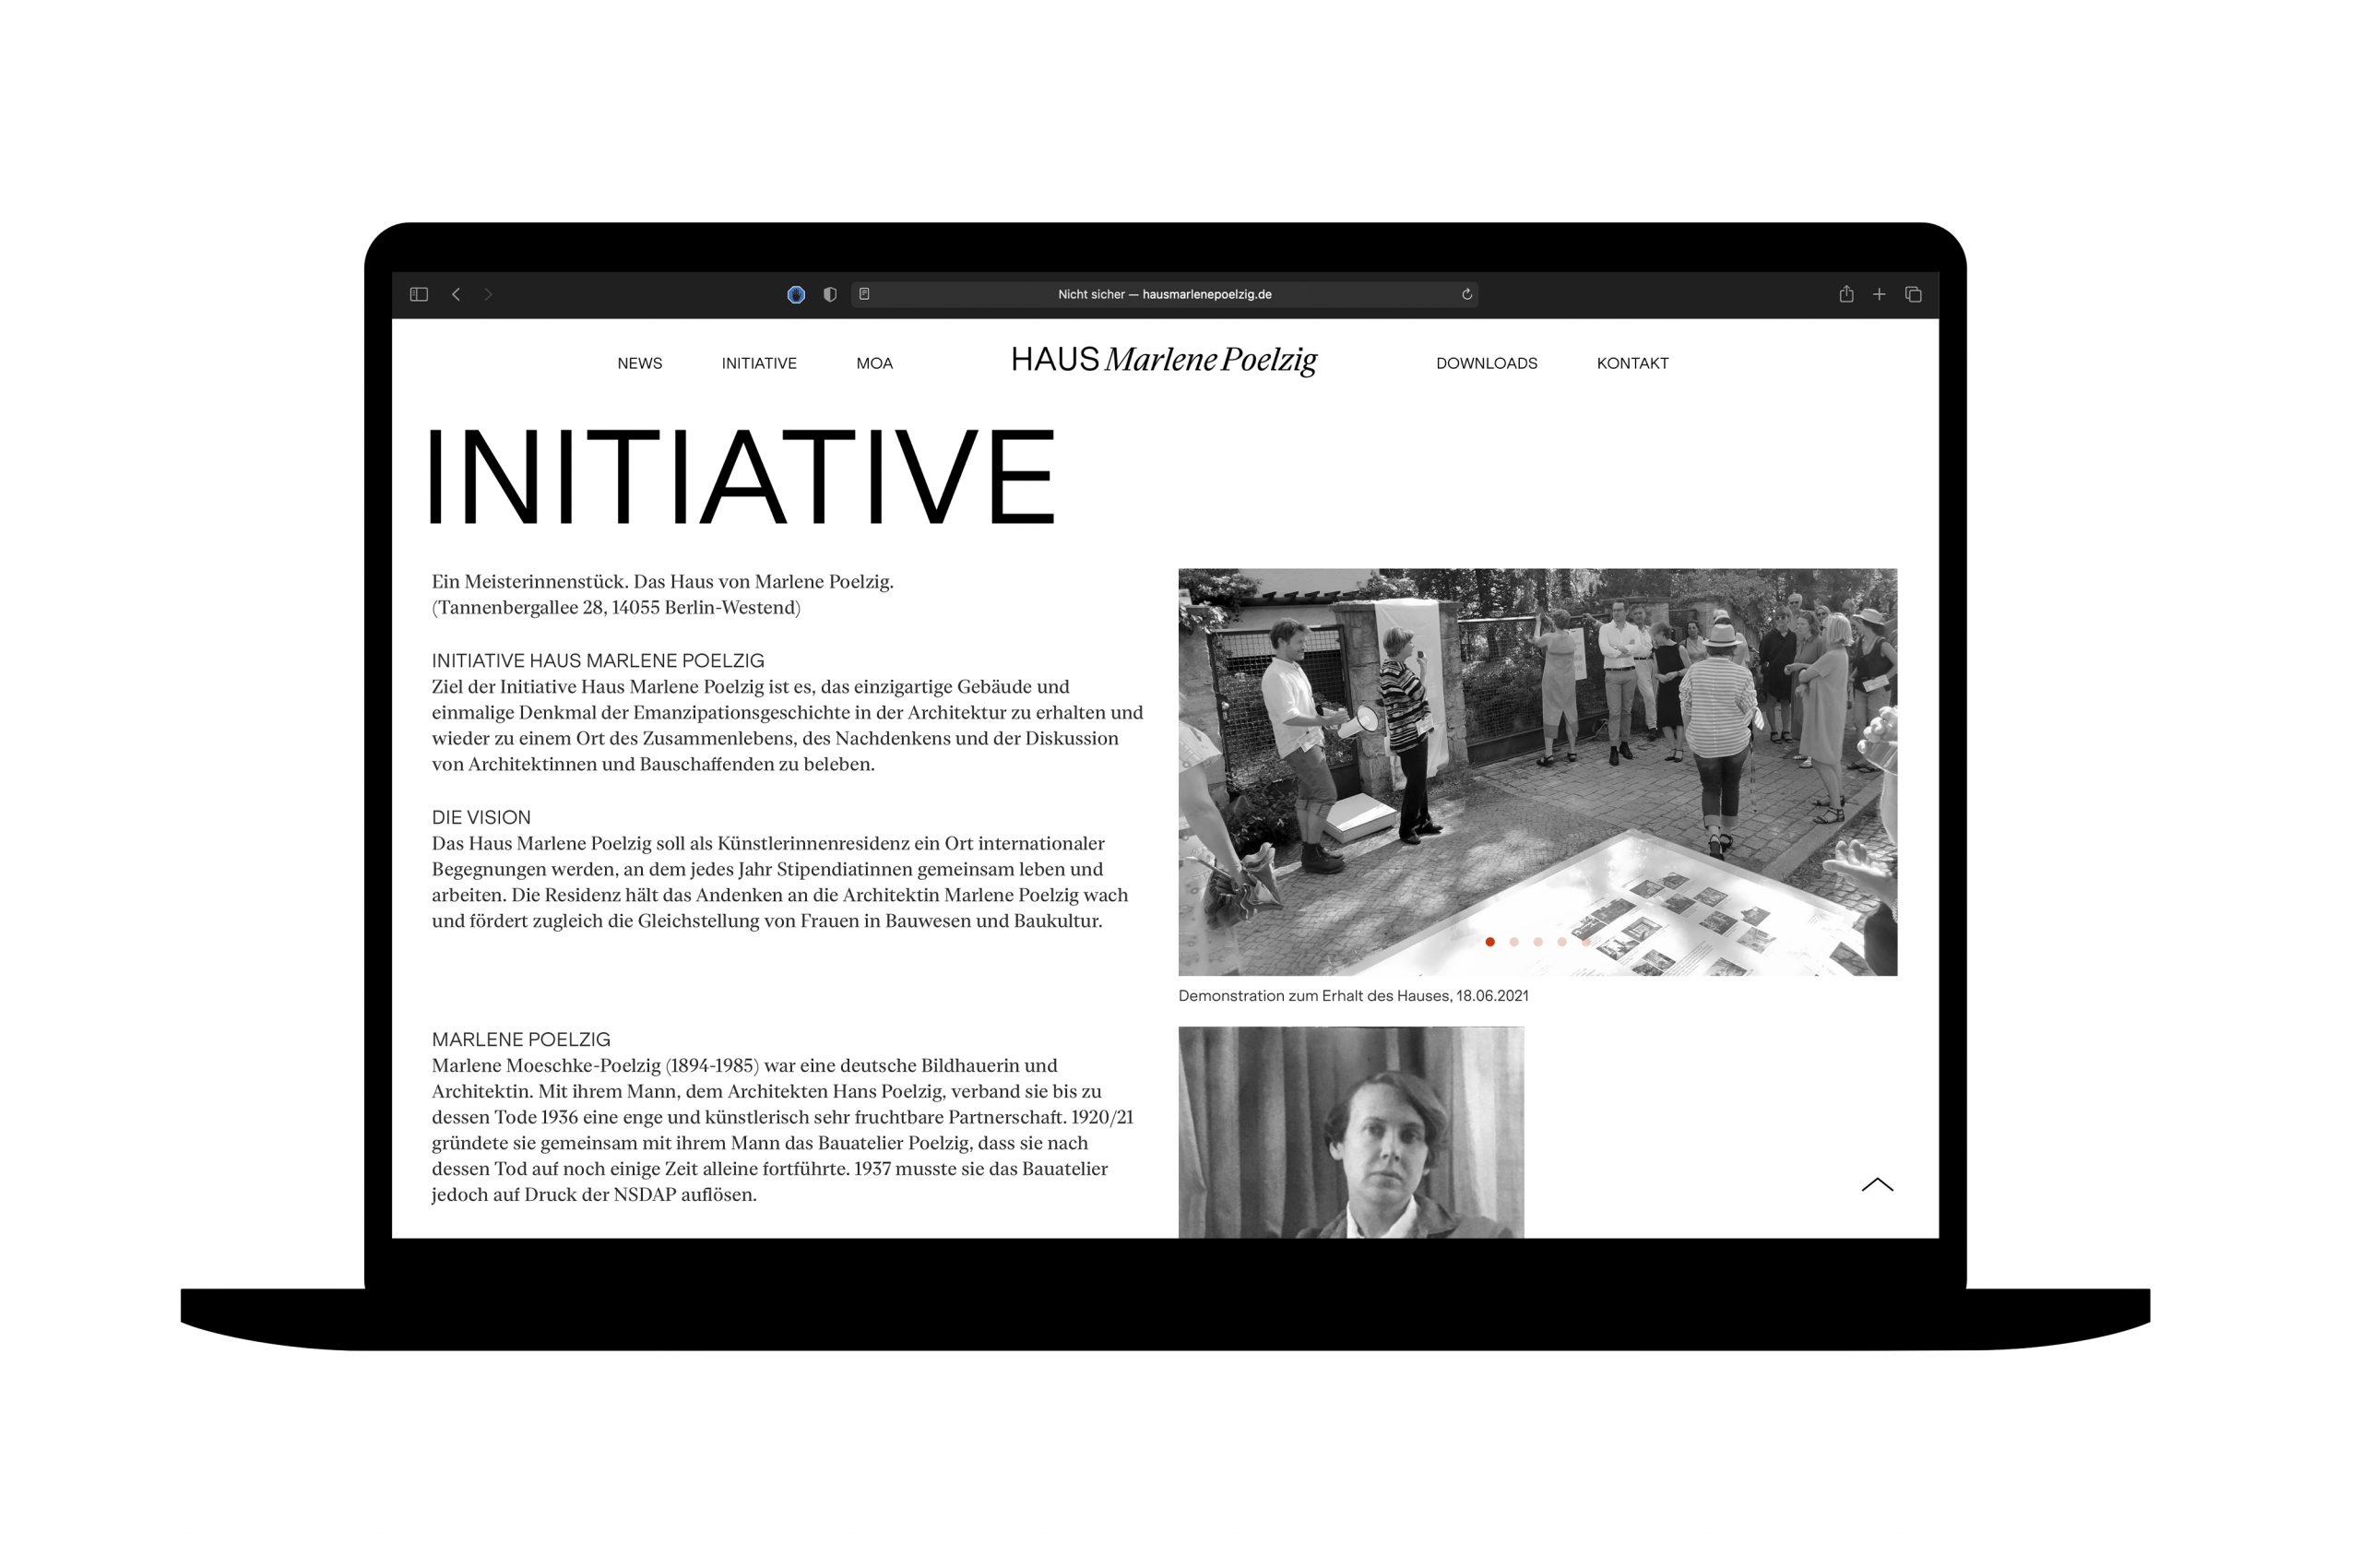 THE TEMPLATESGlobal Creative Resource Agency